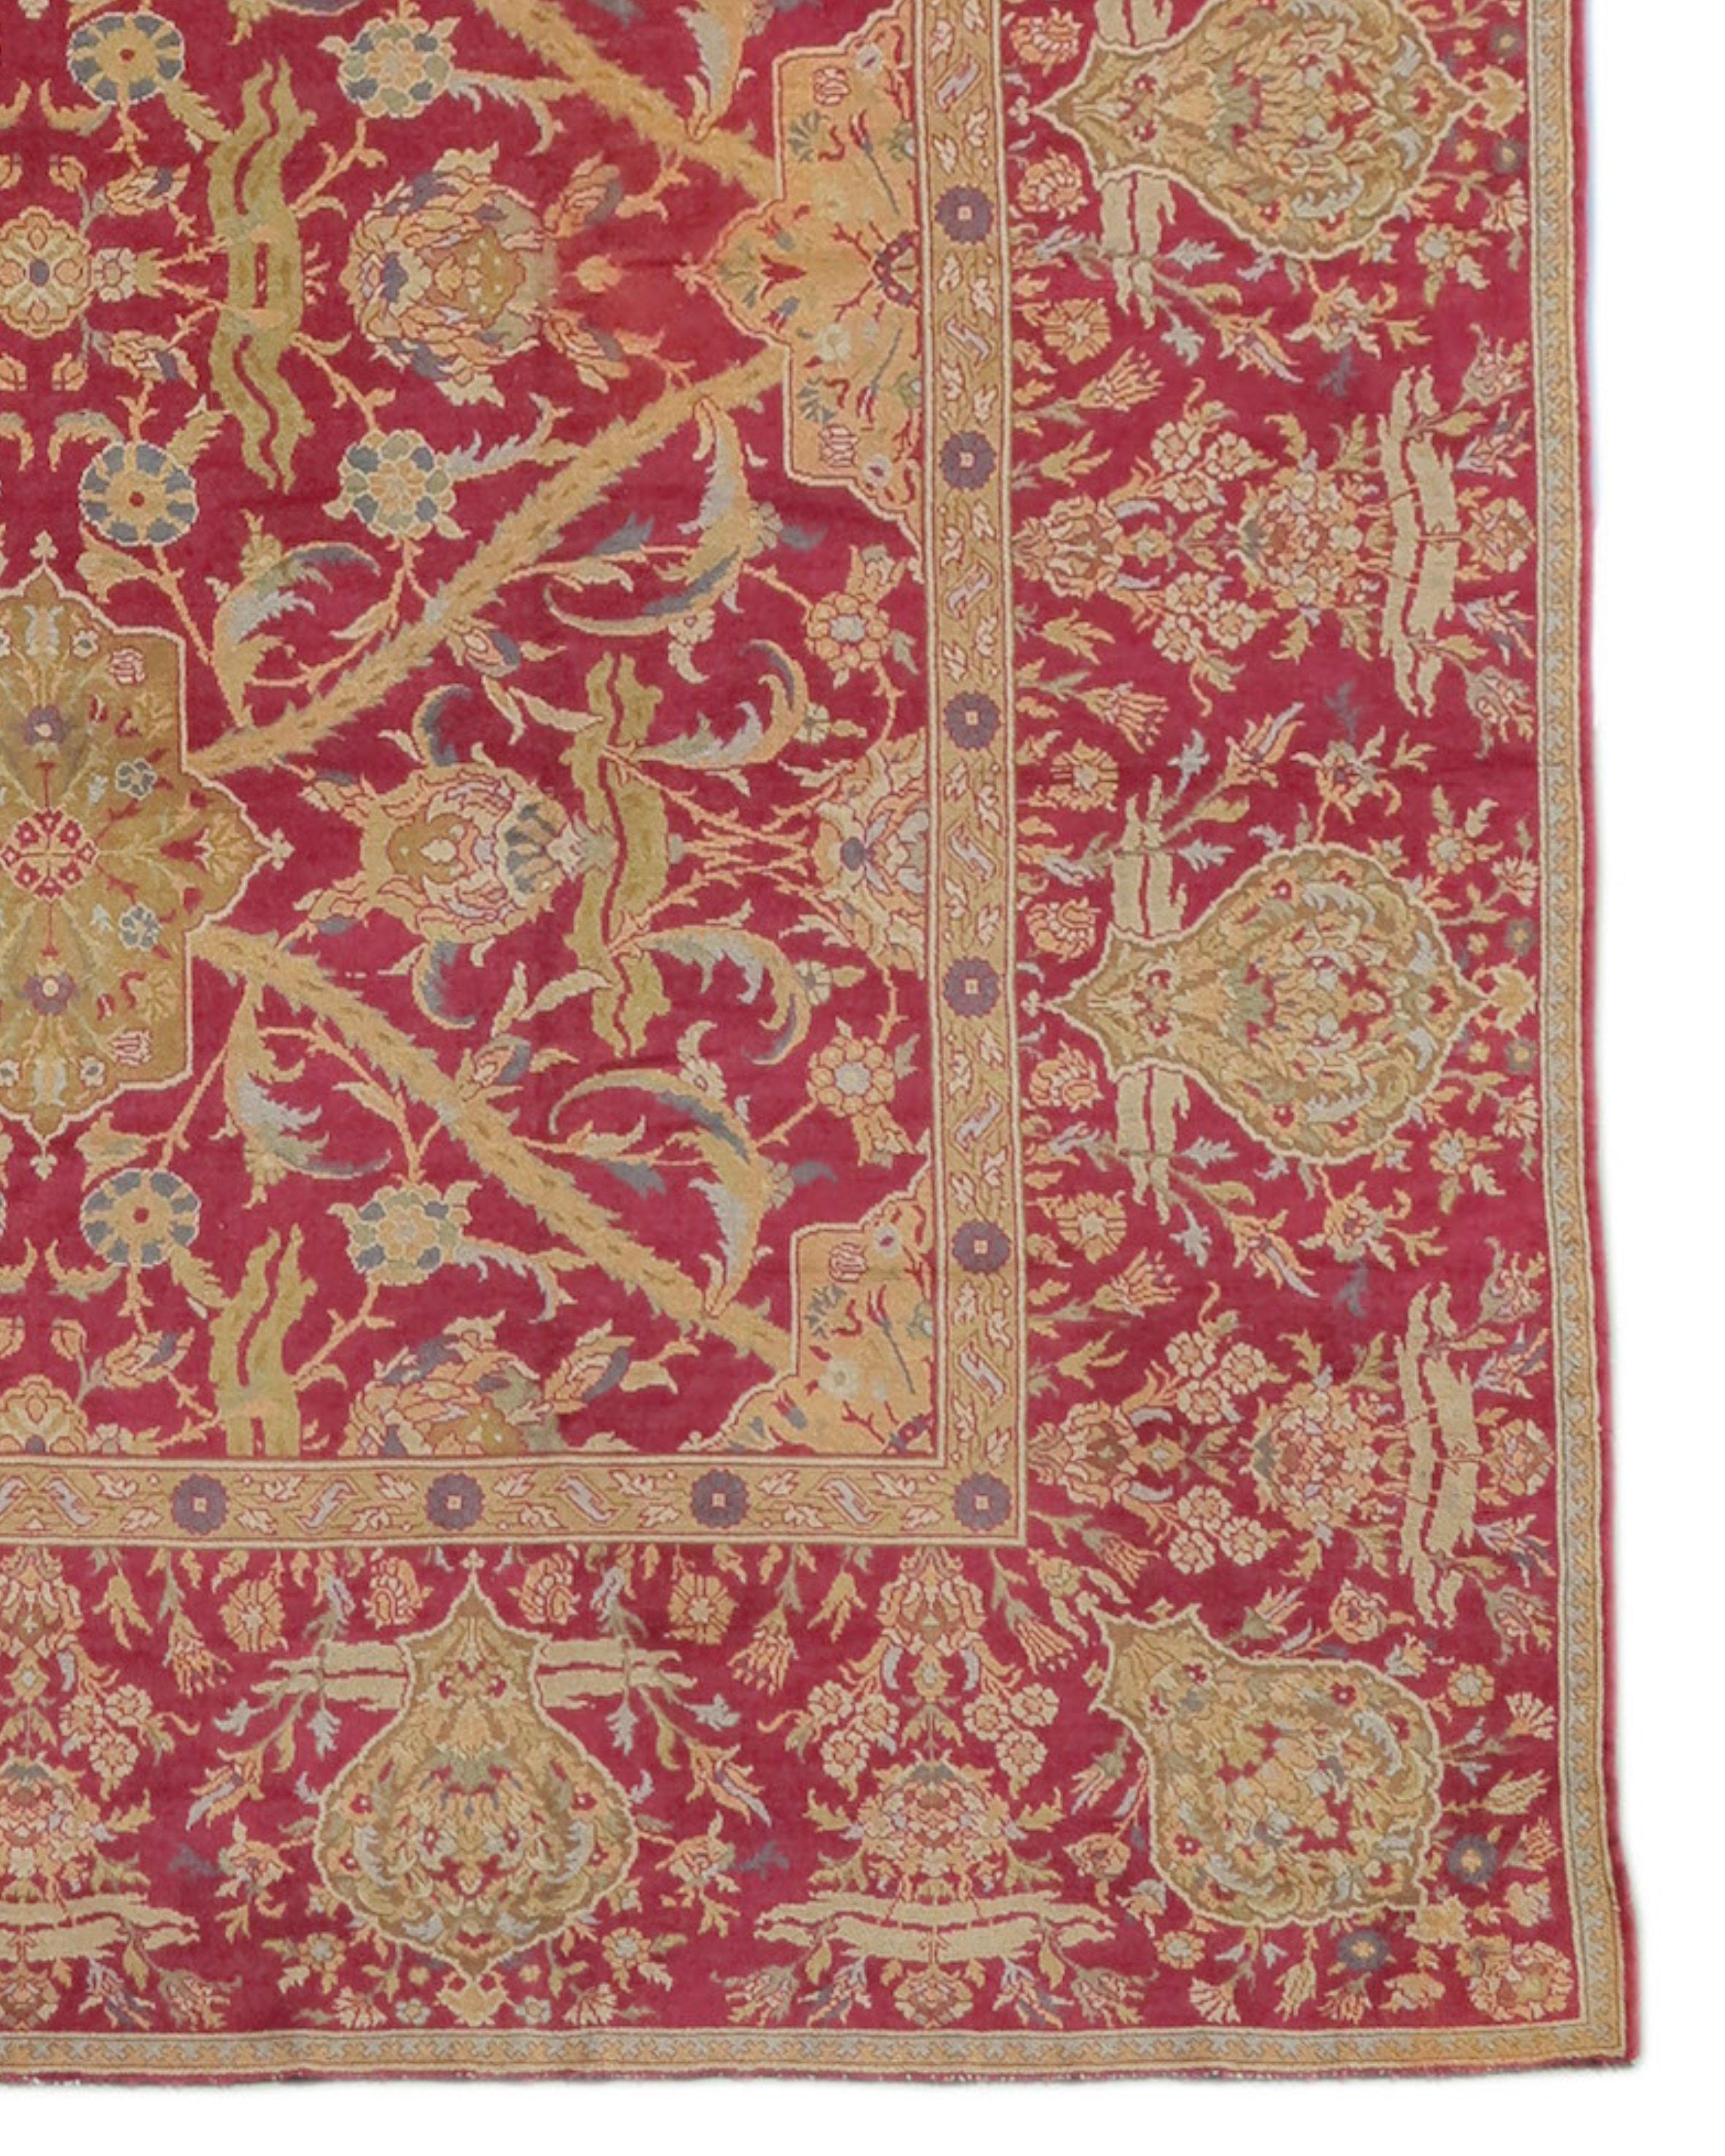 Antique Austrian Ottoman-Style Carpet, Late 19th Century

During the late 19th century, European scholars became increasingly interested in classical Oriental carpets of the 15th to 17th centuries, and it was at this time various Western museums and